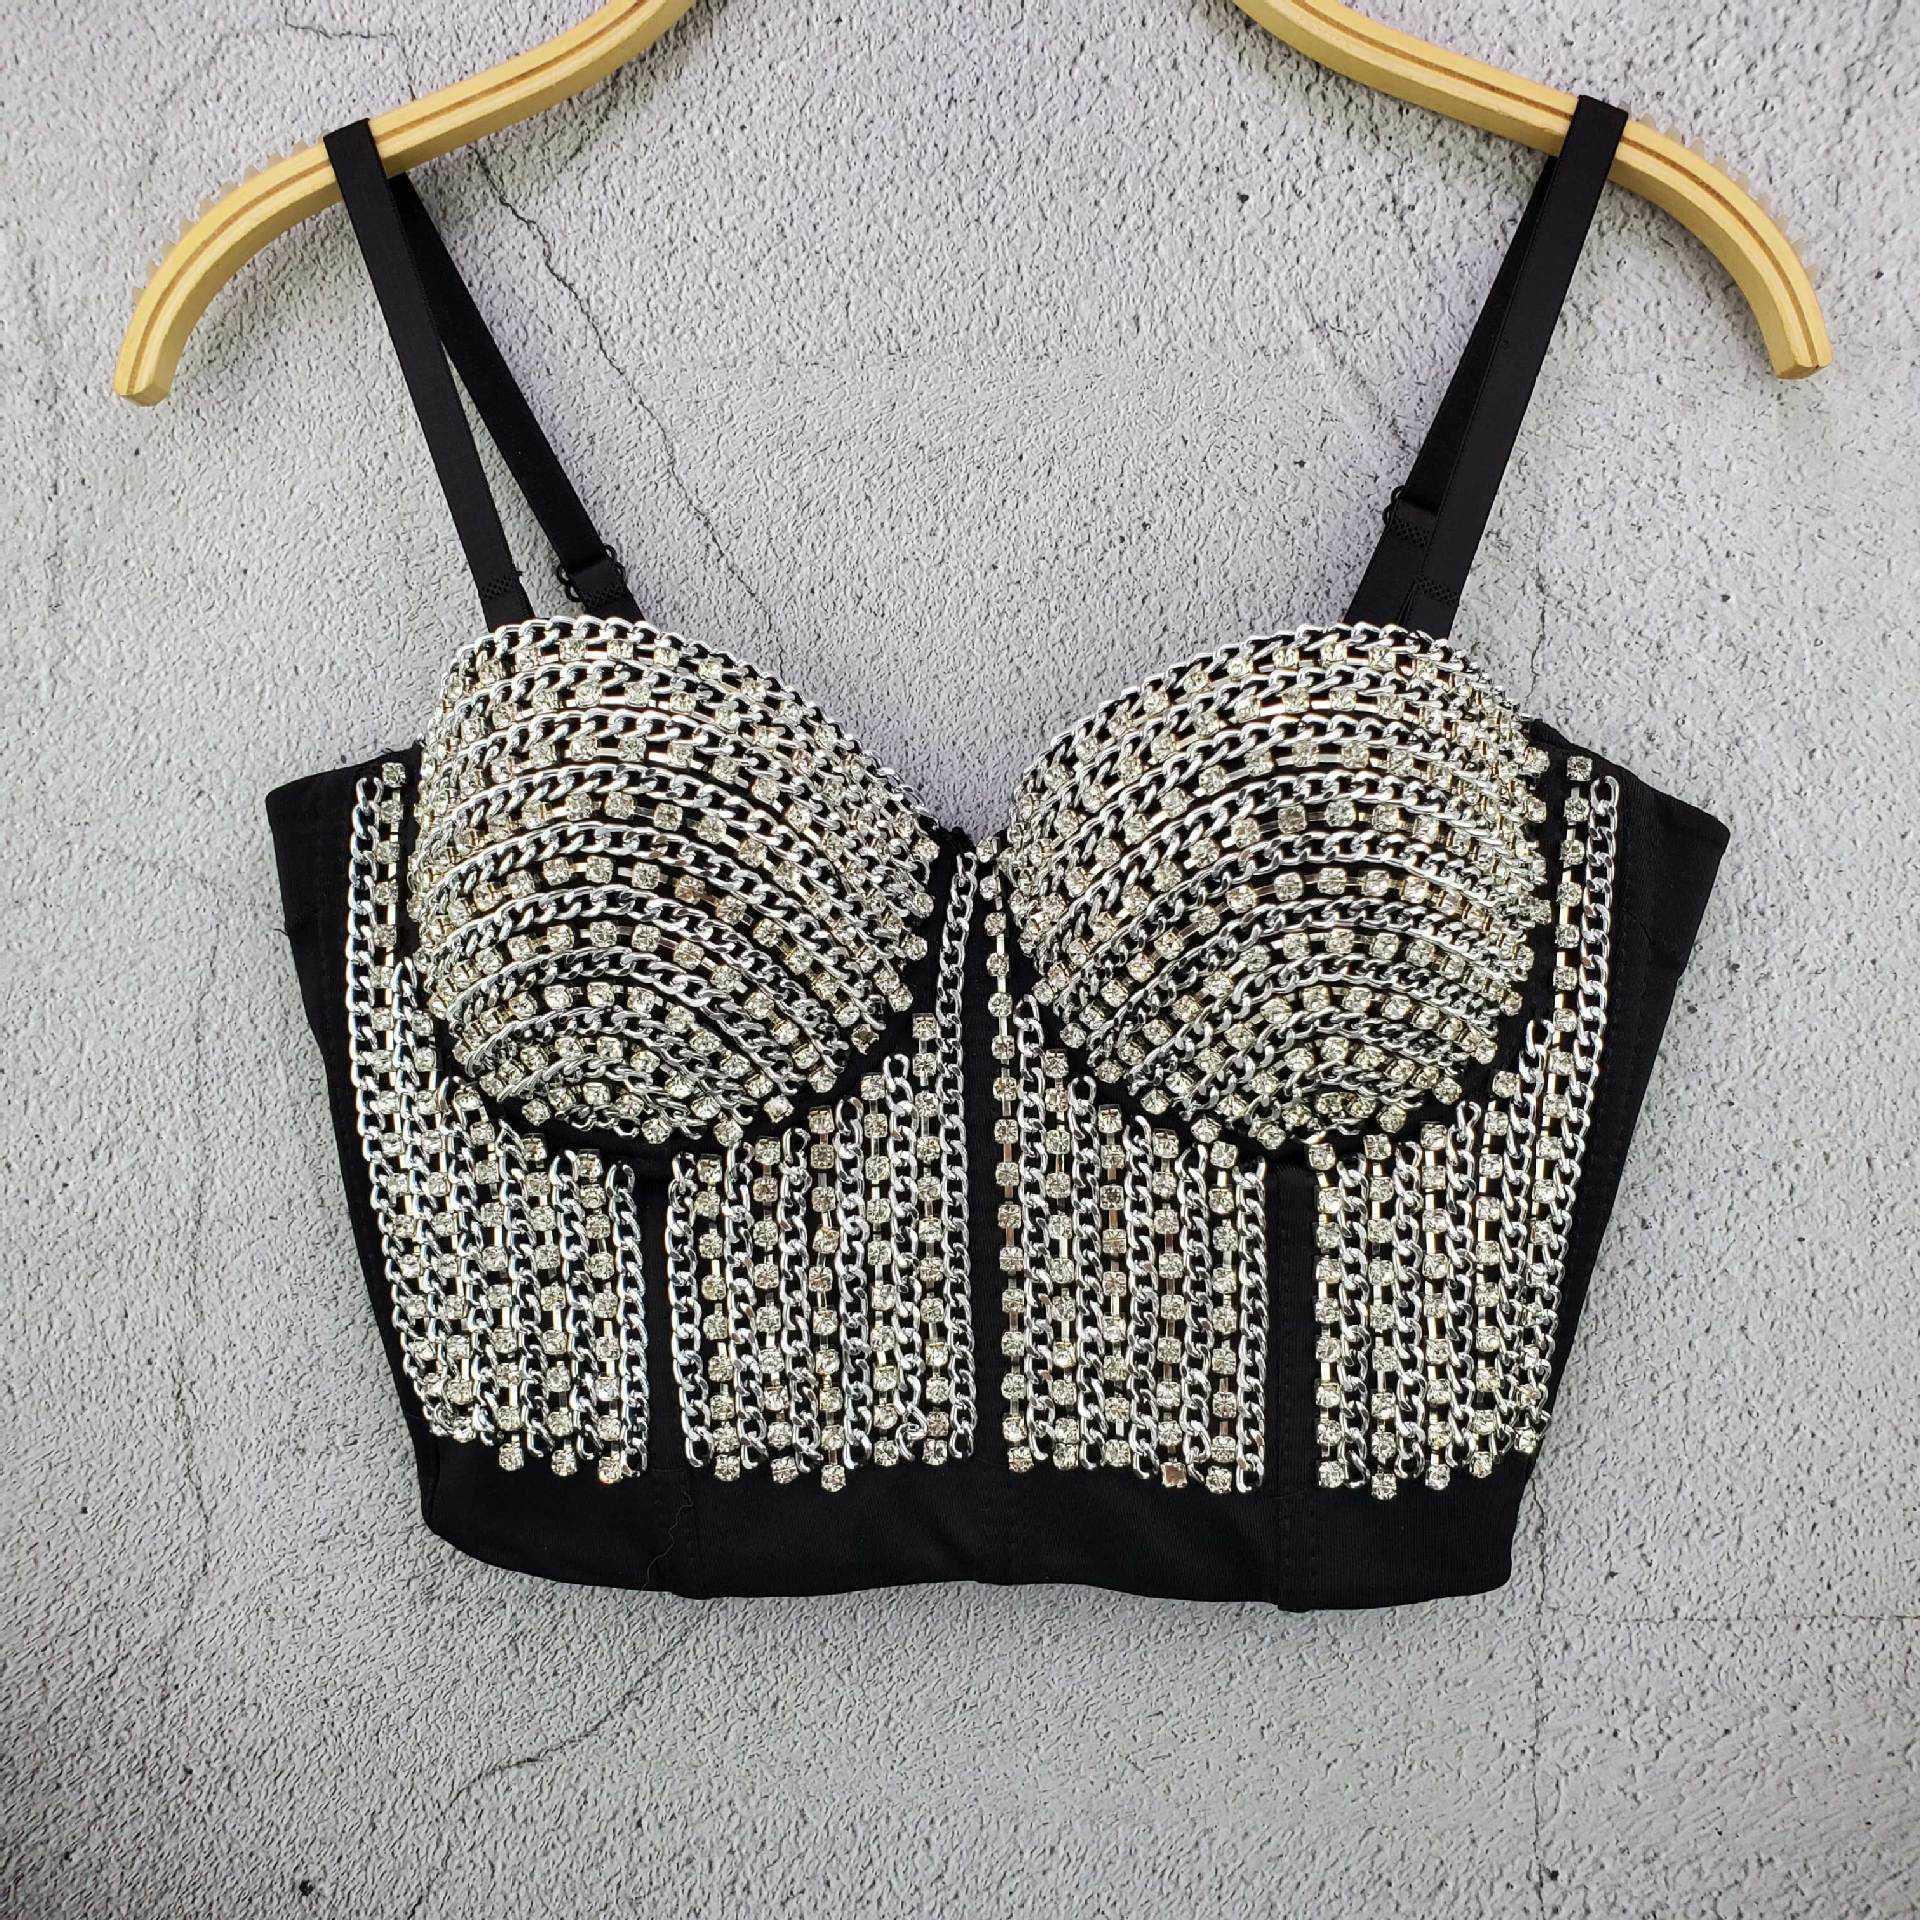 

Chain drill heavy industry suspender top female anchor metal outer wearing Strapless vest, Silver